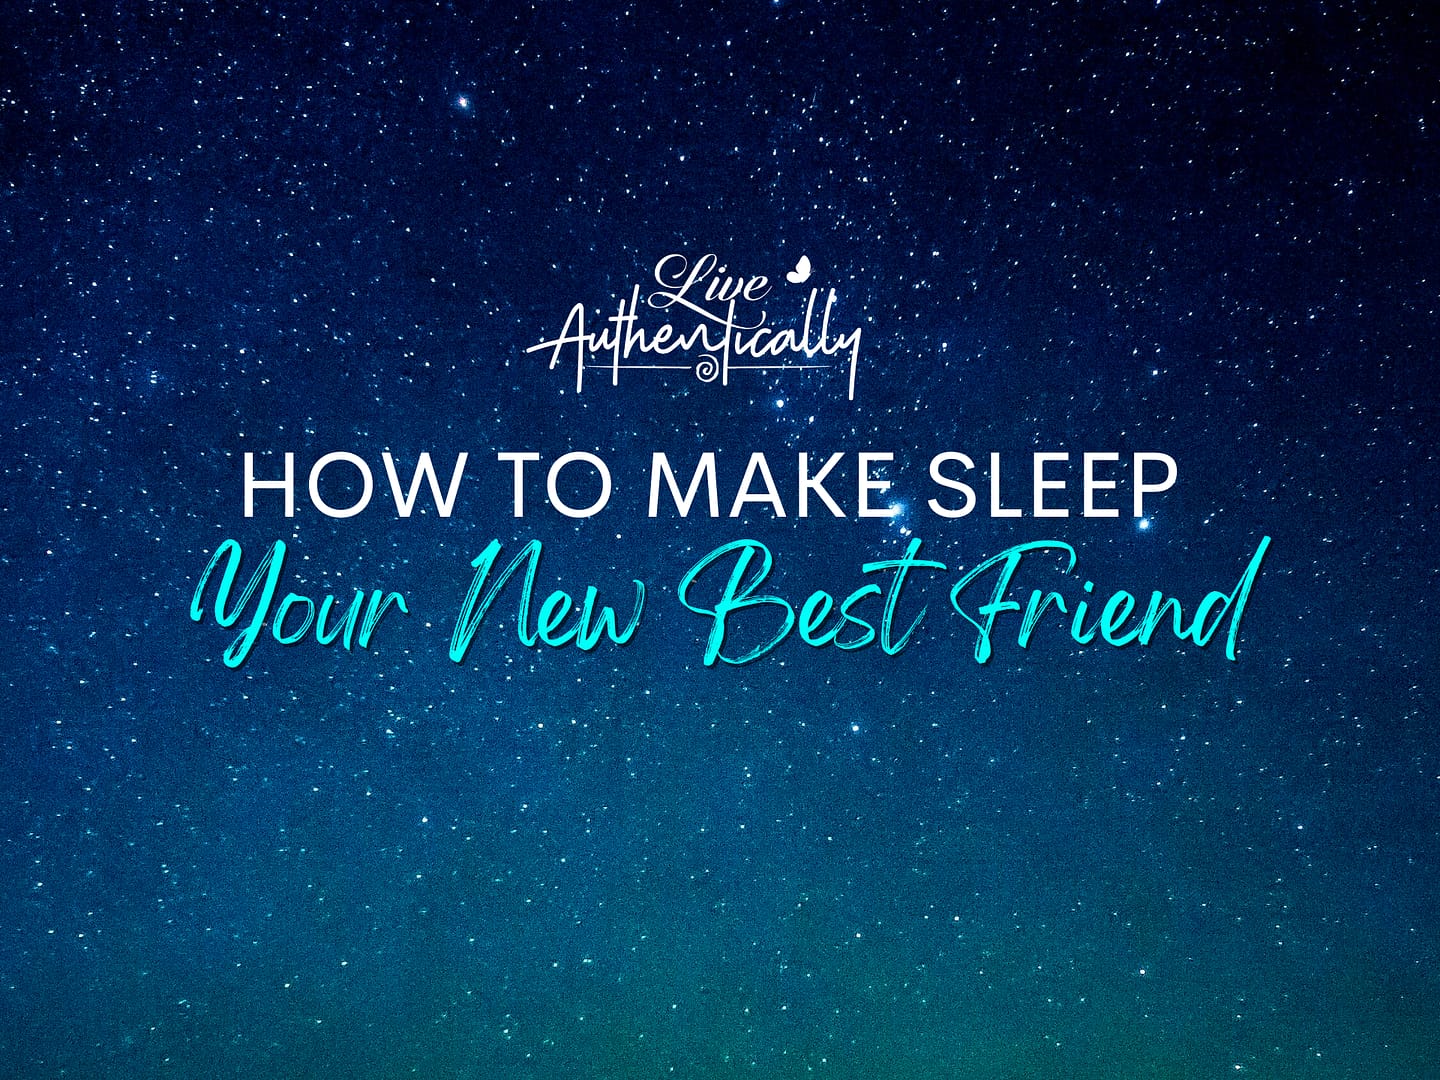 How to Make Sleep Your New Best Friend